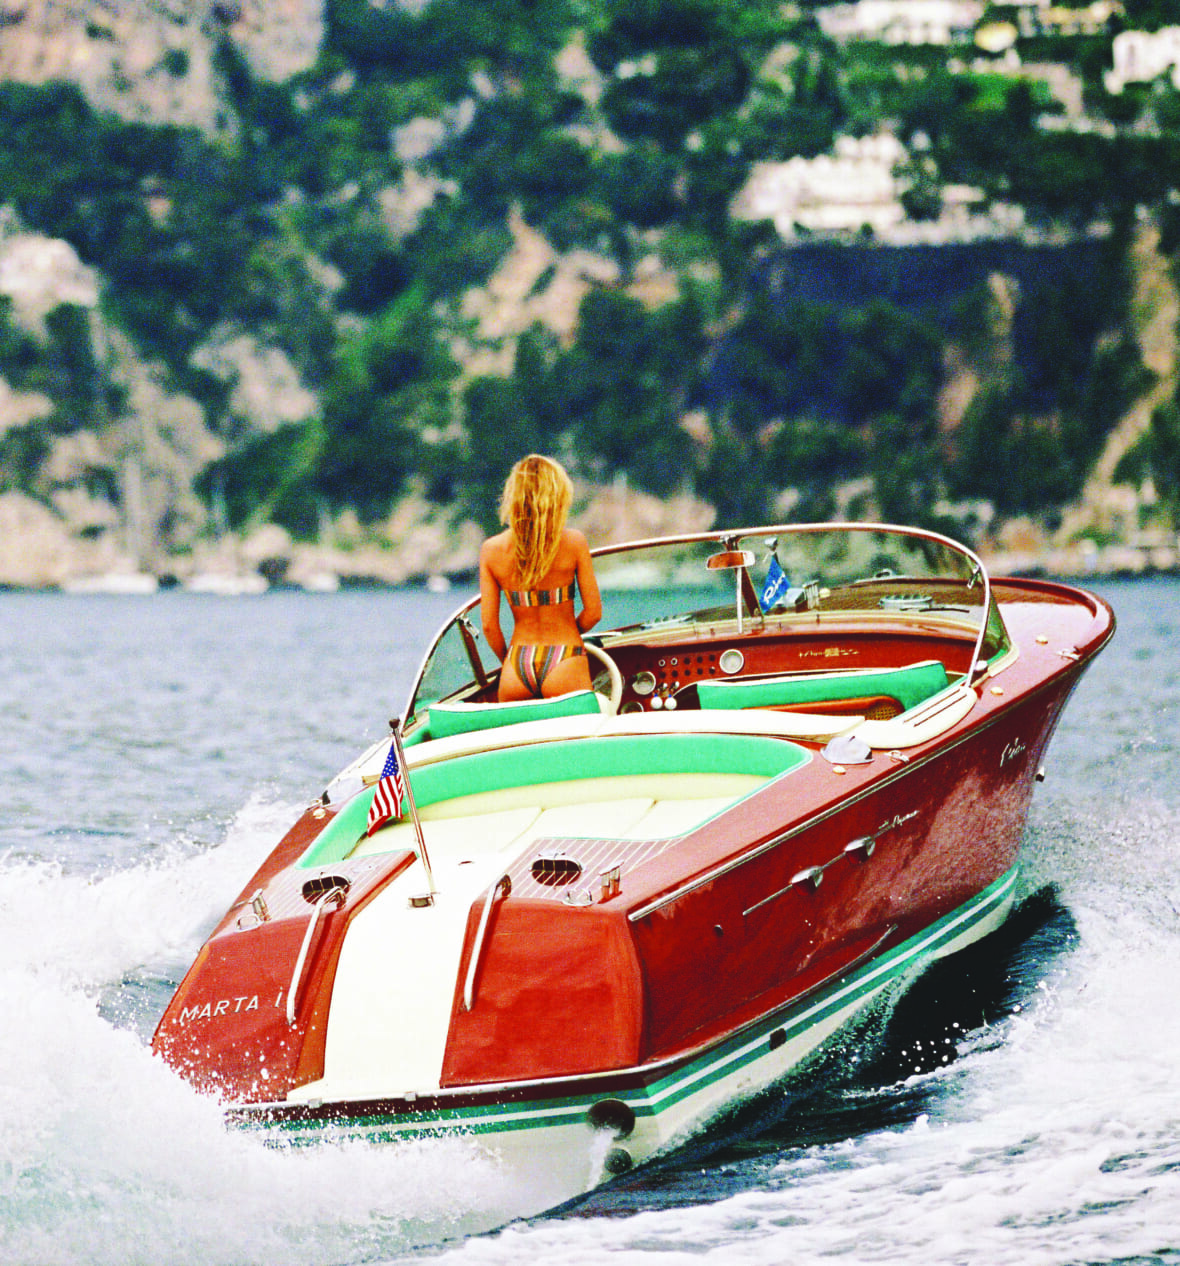 The Riva Aquarama Is The Most Stylish Boat Of All Time - Maxim